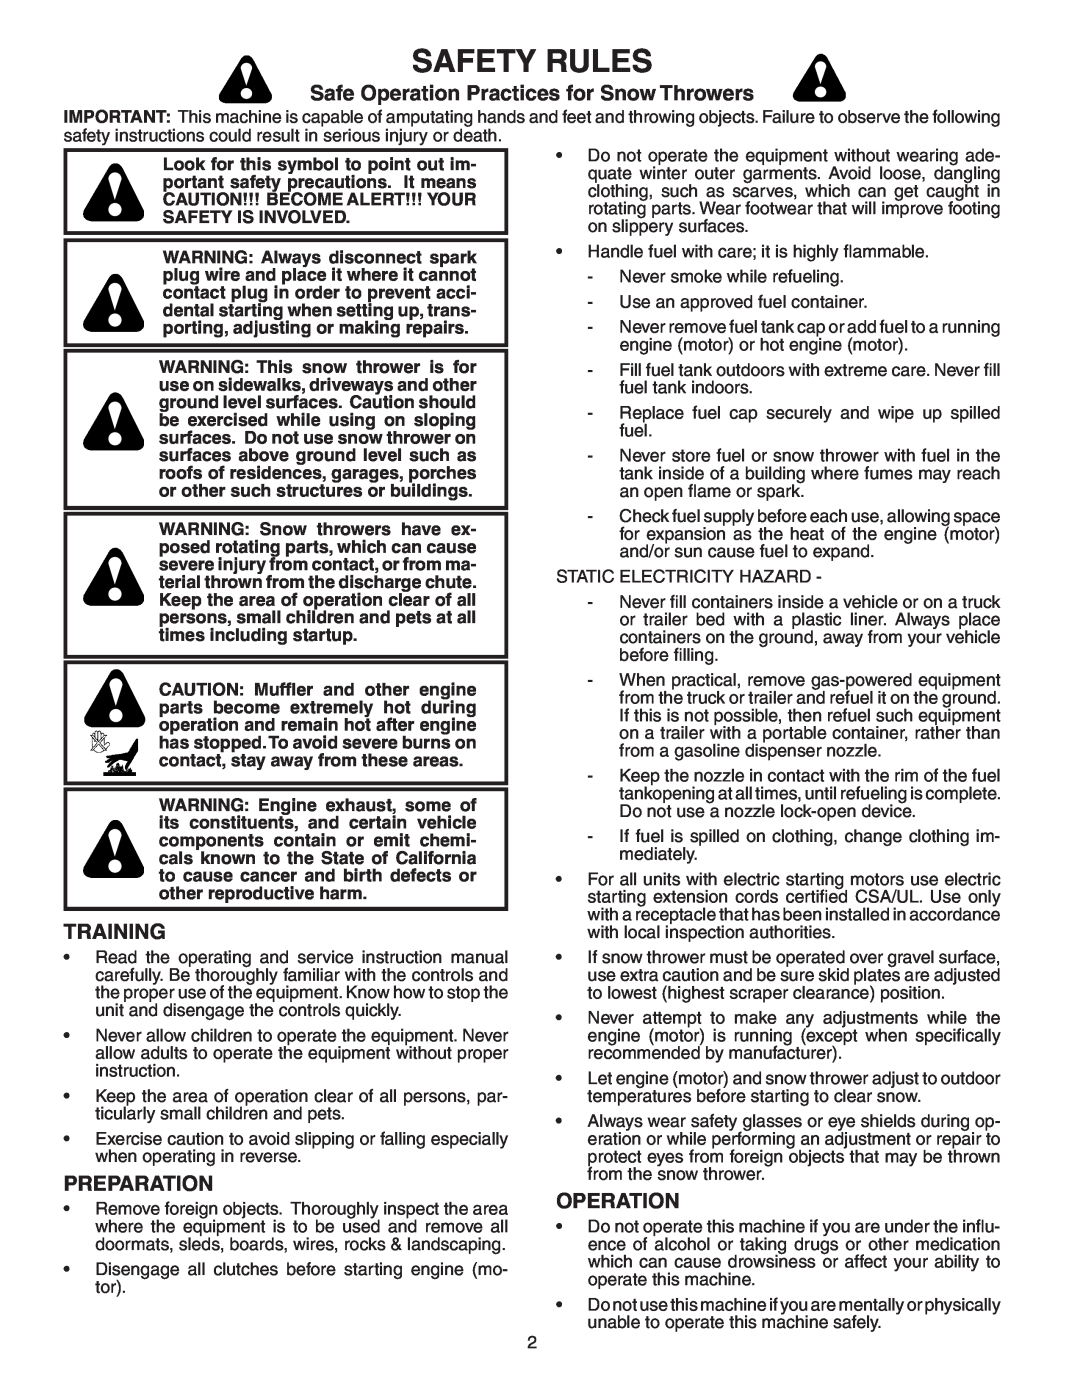 Husqvarna 9027ST owner manual Safety Rules, Safe Operation Practices for Snow Throwers, Training, Preparation 